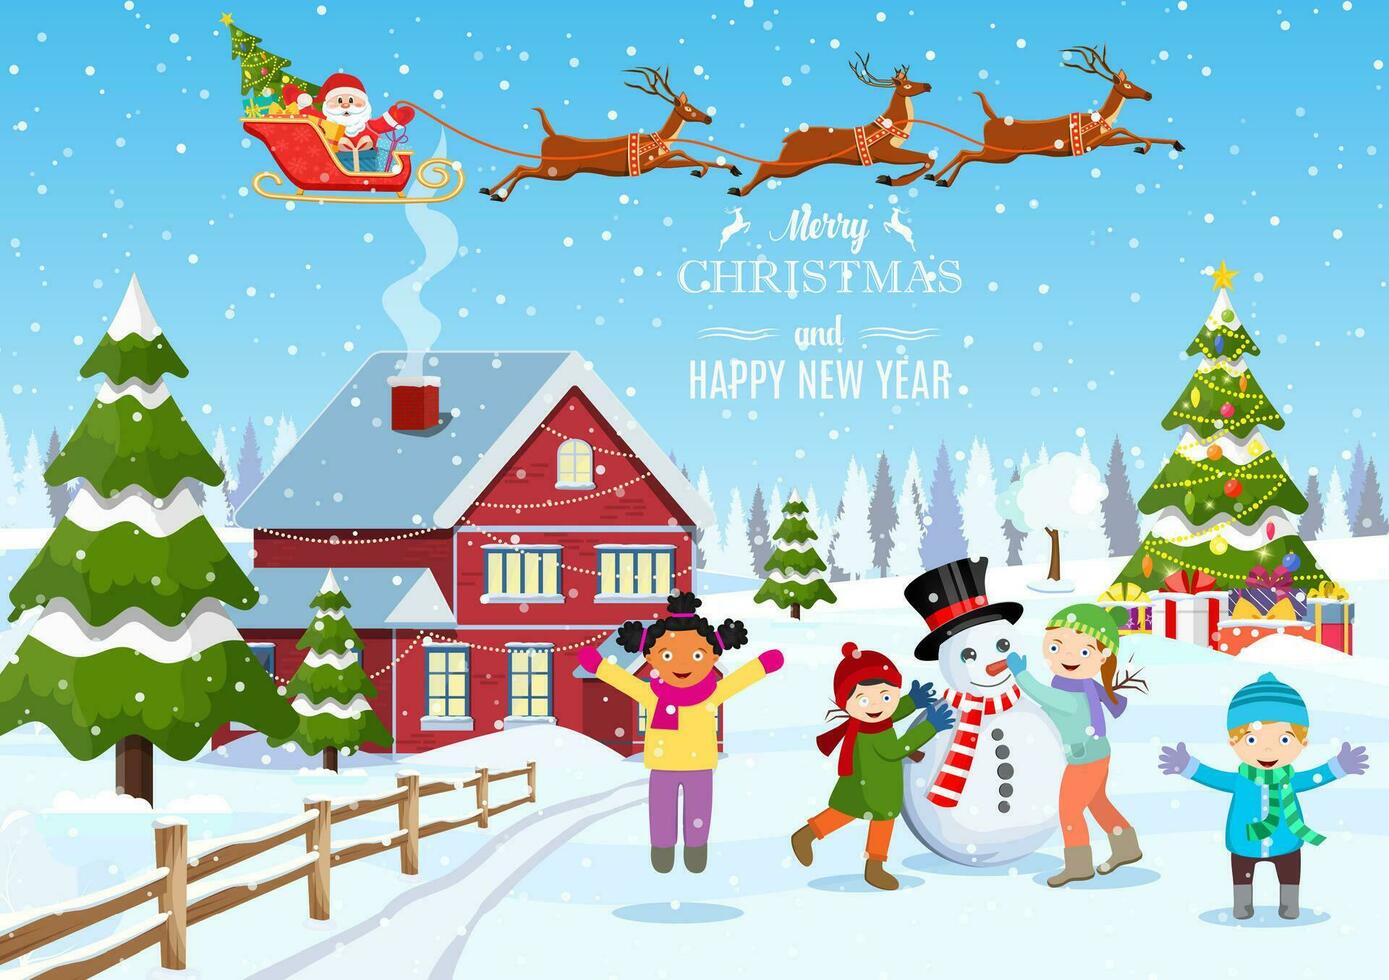 Suburban house covered snow. Building in holiday ornament. Christmas landscape tree spruce, snowman. Happy new year decoration. Merry christmas holiday. Children building snowman. Vector illustration